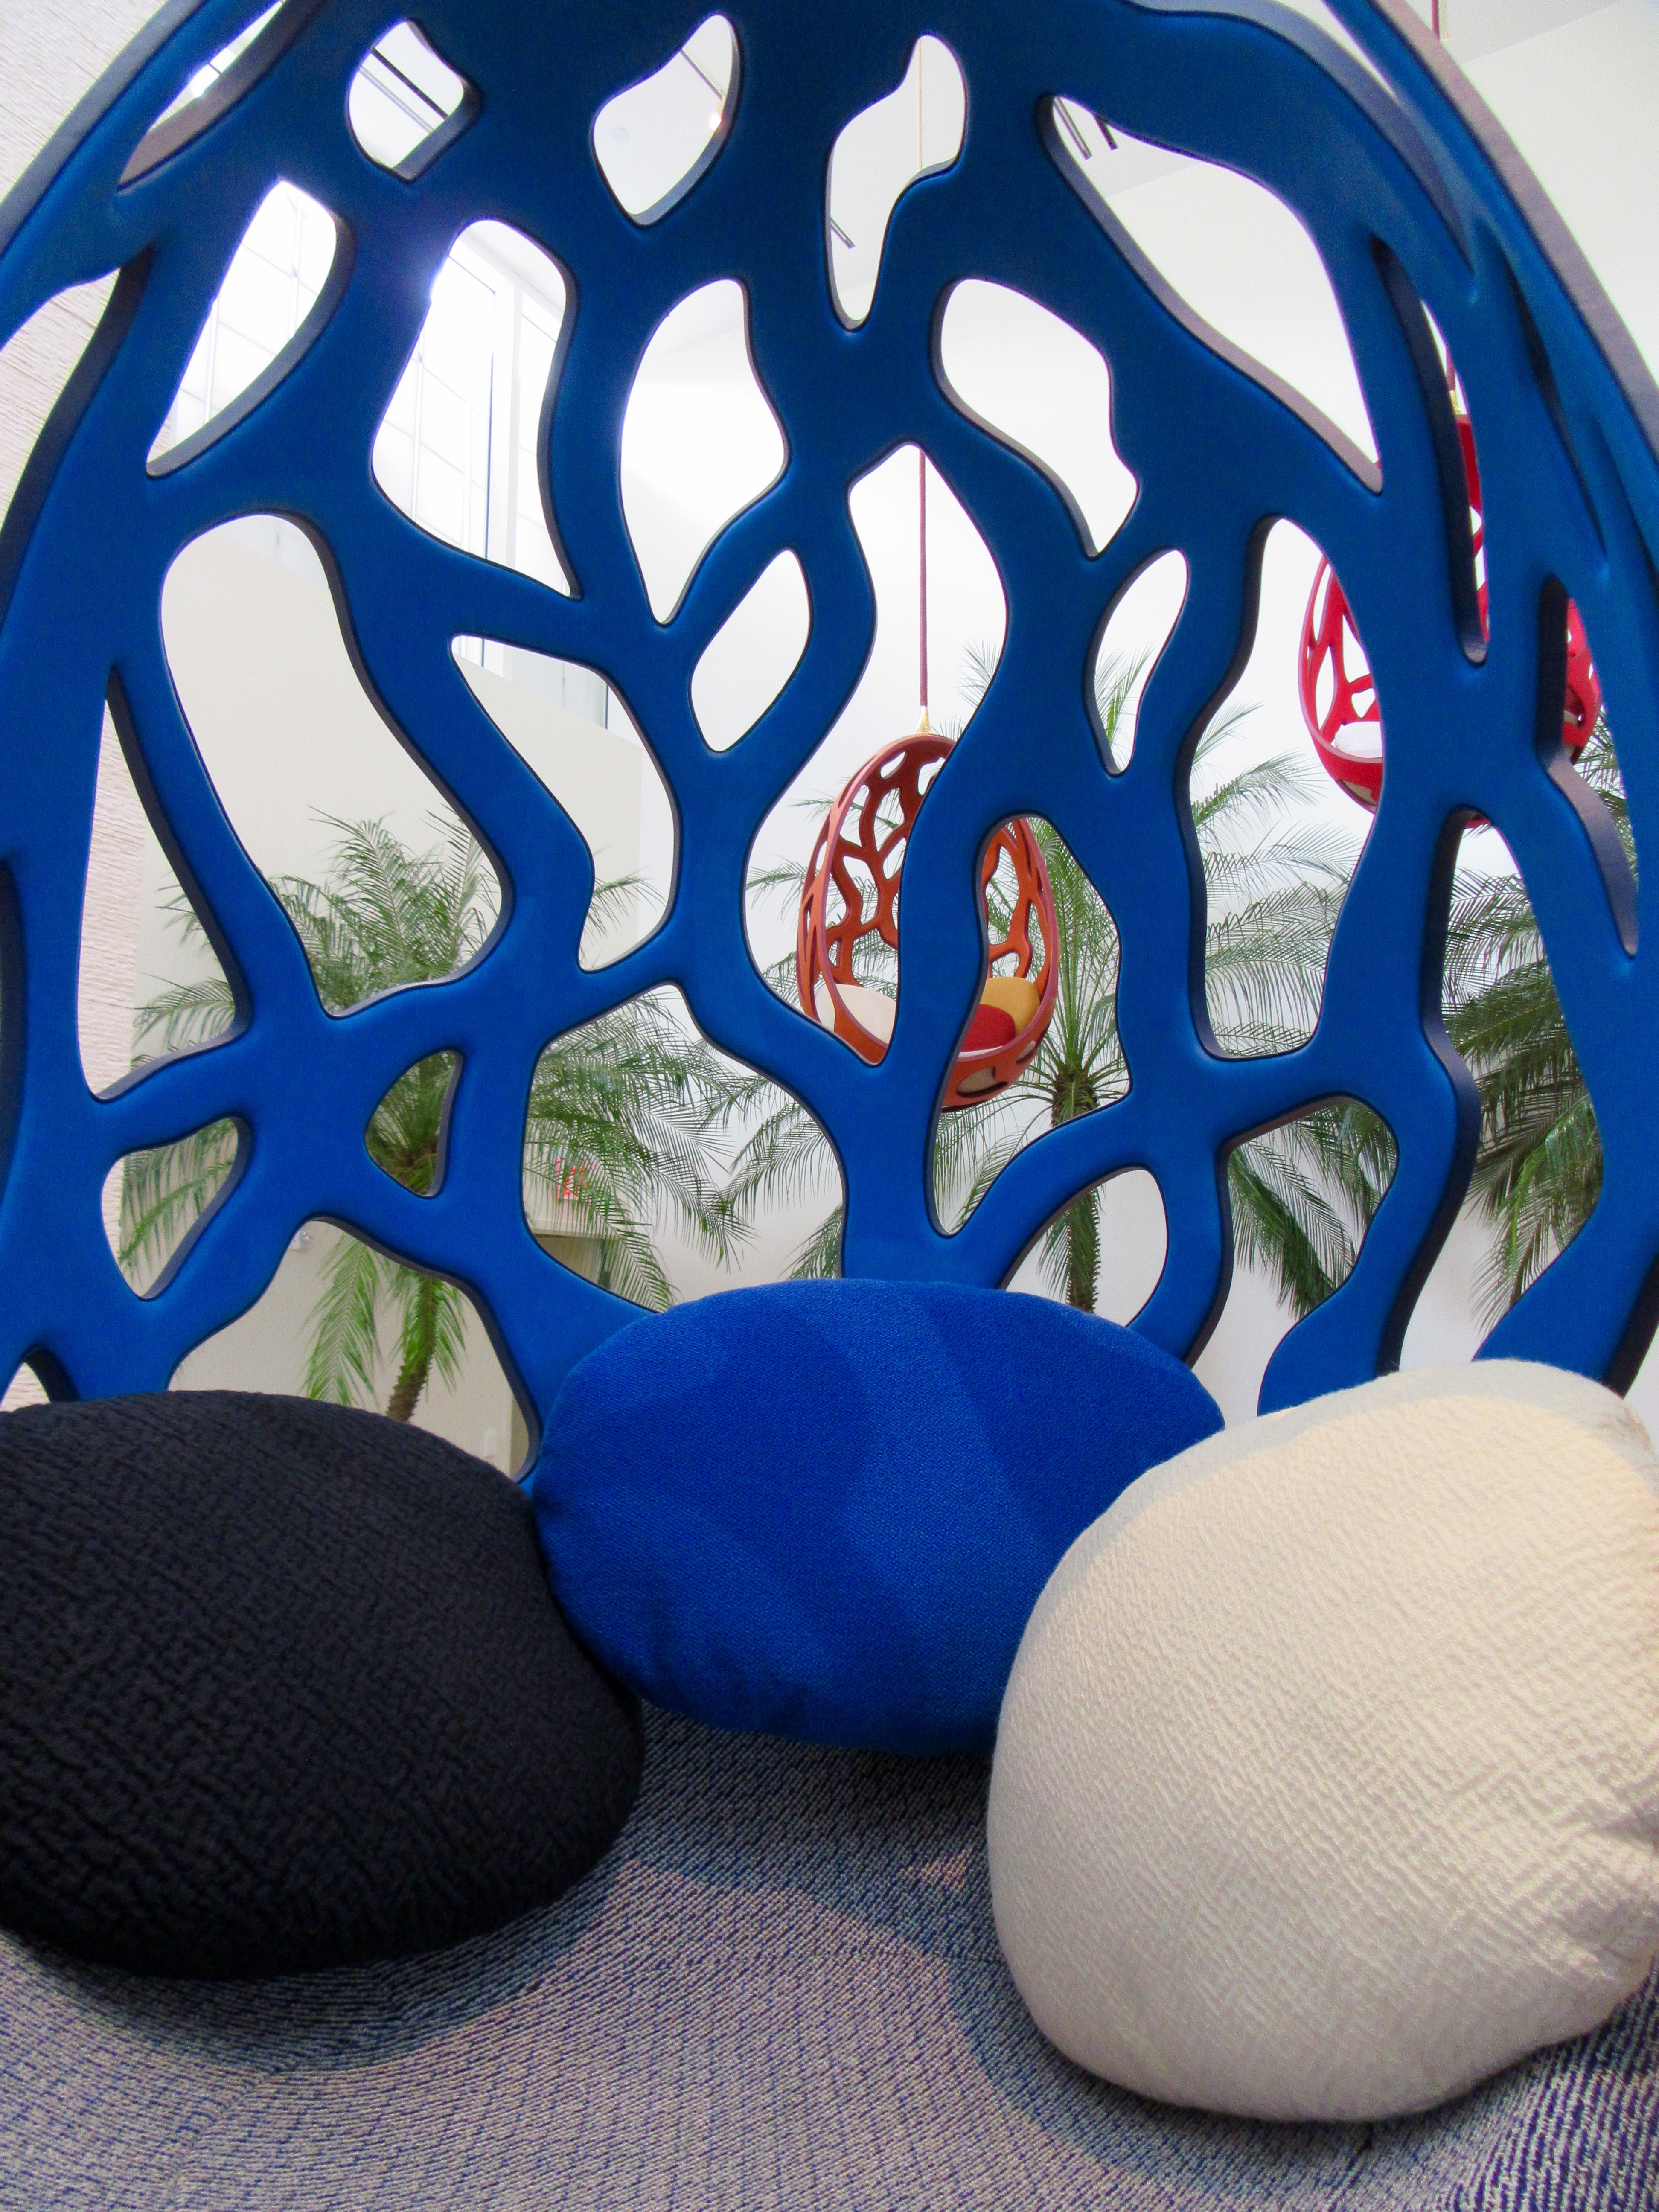 3rings  Design Miami 2016: Cocoon by Campana Brothers for Louis